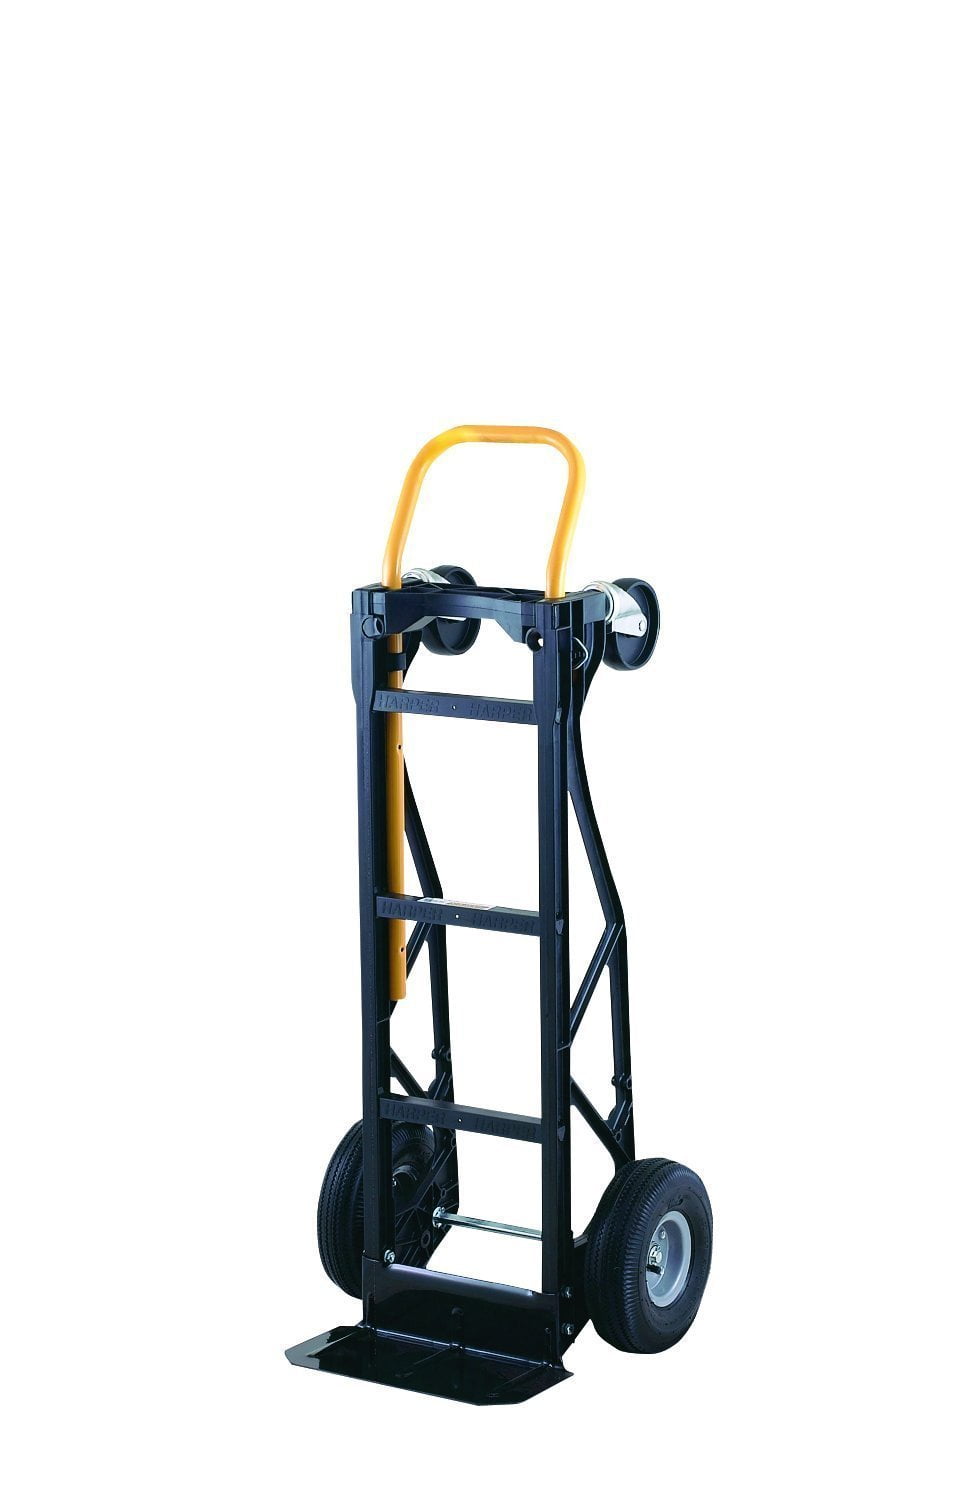 Harper Trucks PGDYK1635PKD Convertible Hand Truck and Dolly with 10in Black/Yellow for sale online Pneumatic Wheels 